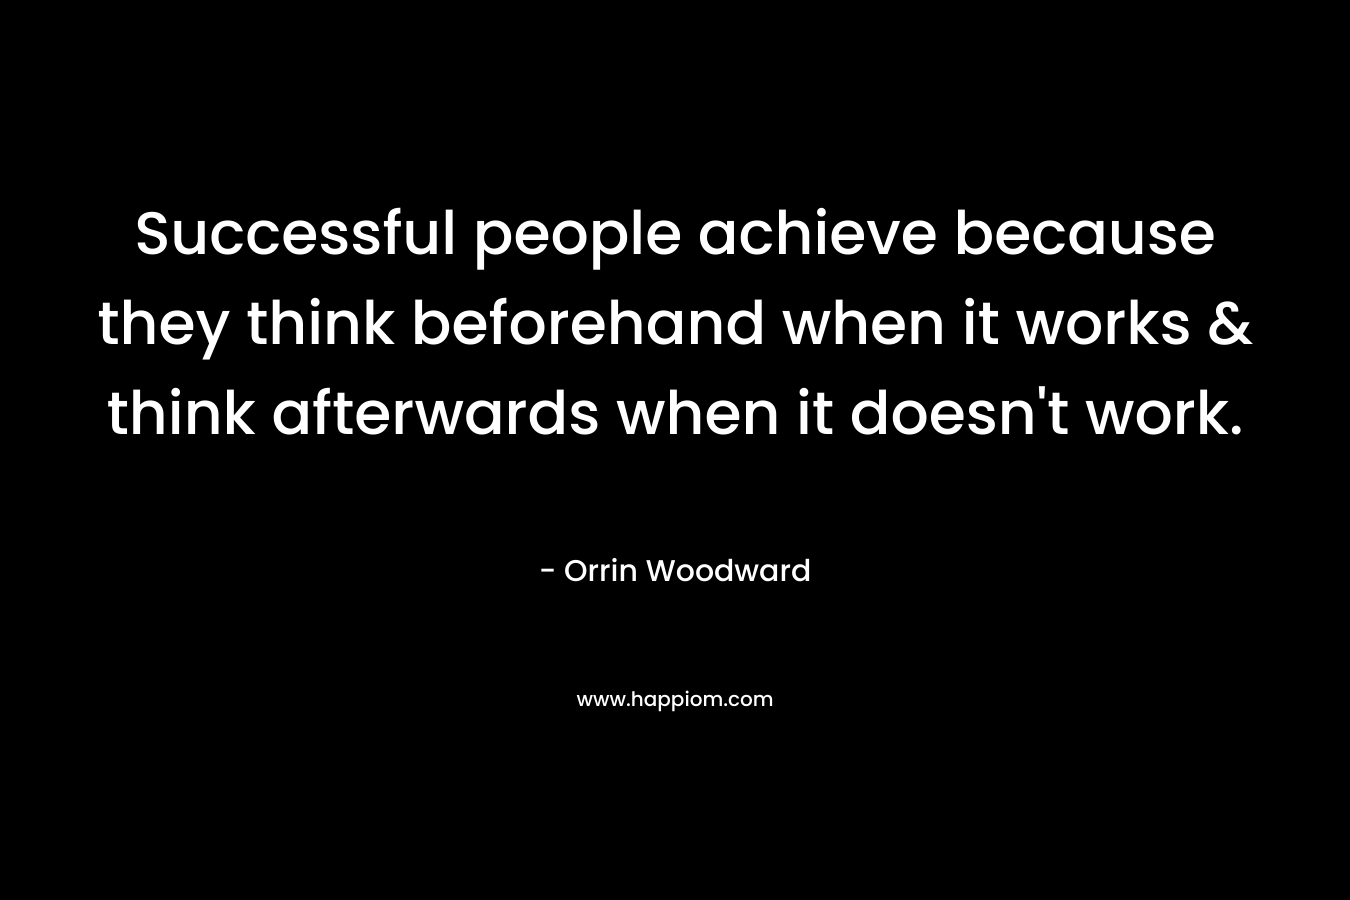 Successful people achieve because they think beforehand when it works & think afterwards when it doesn’t work. – Orrin Woodward